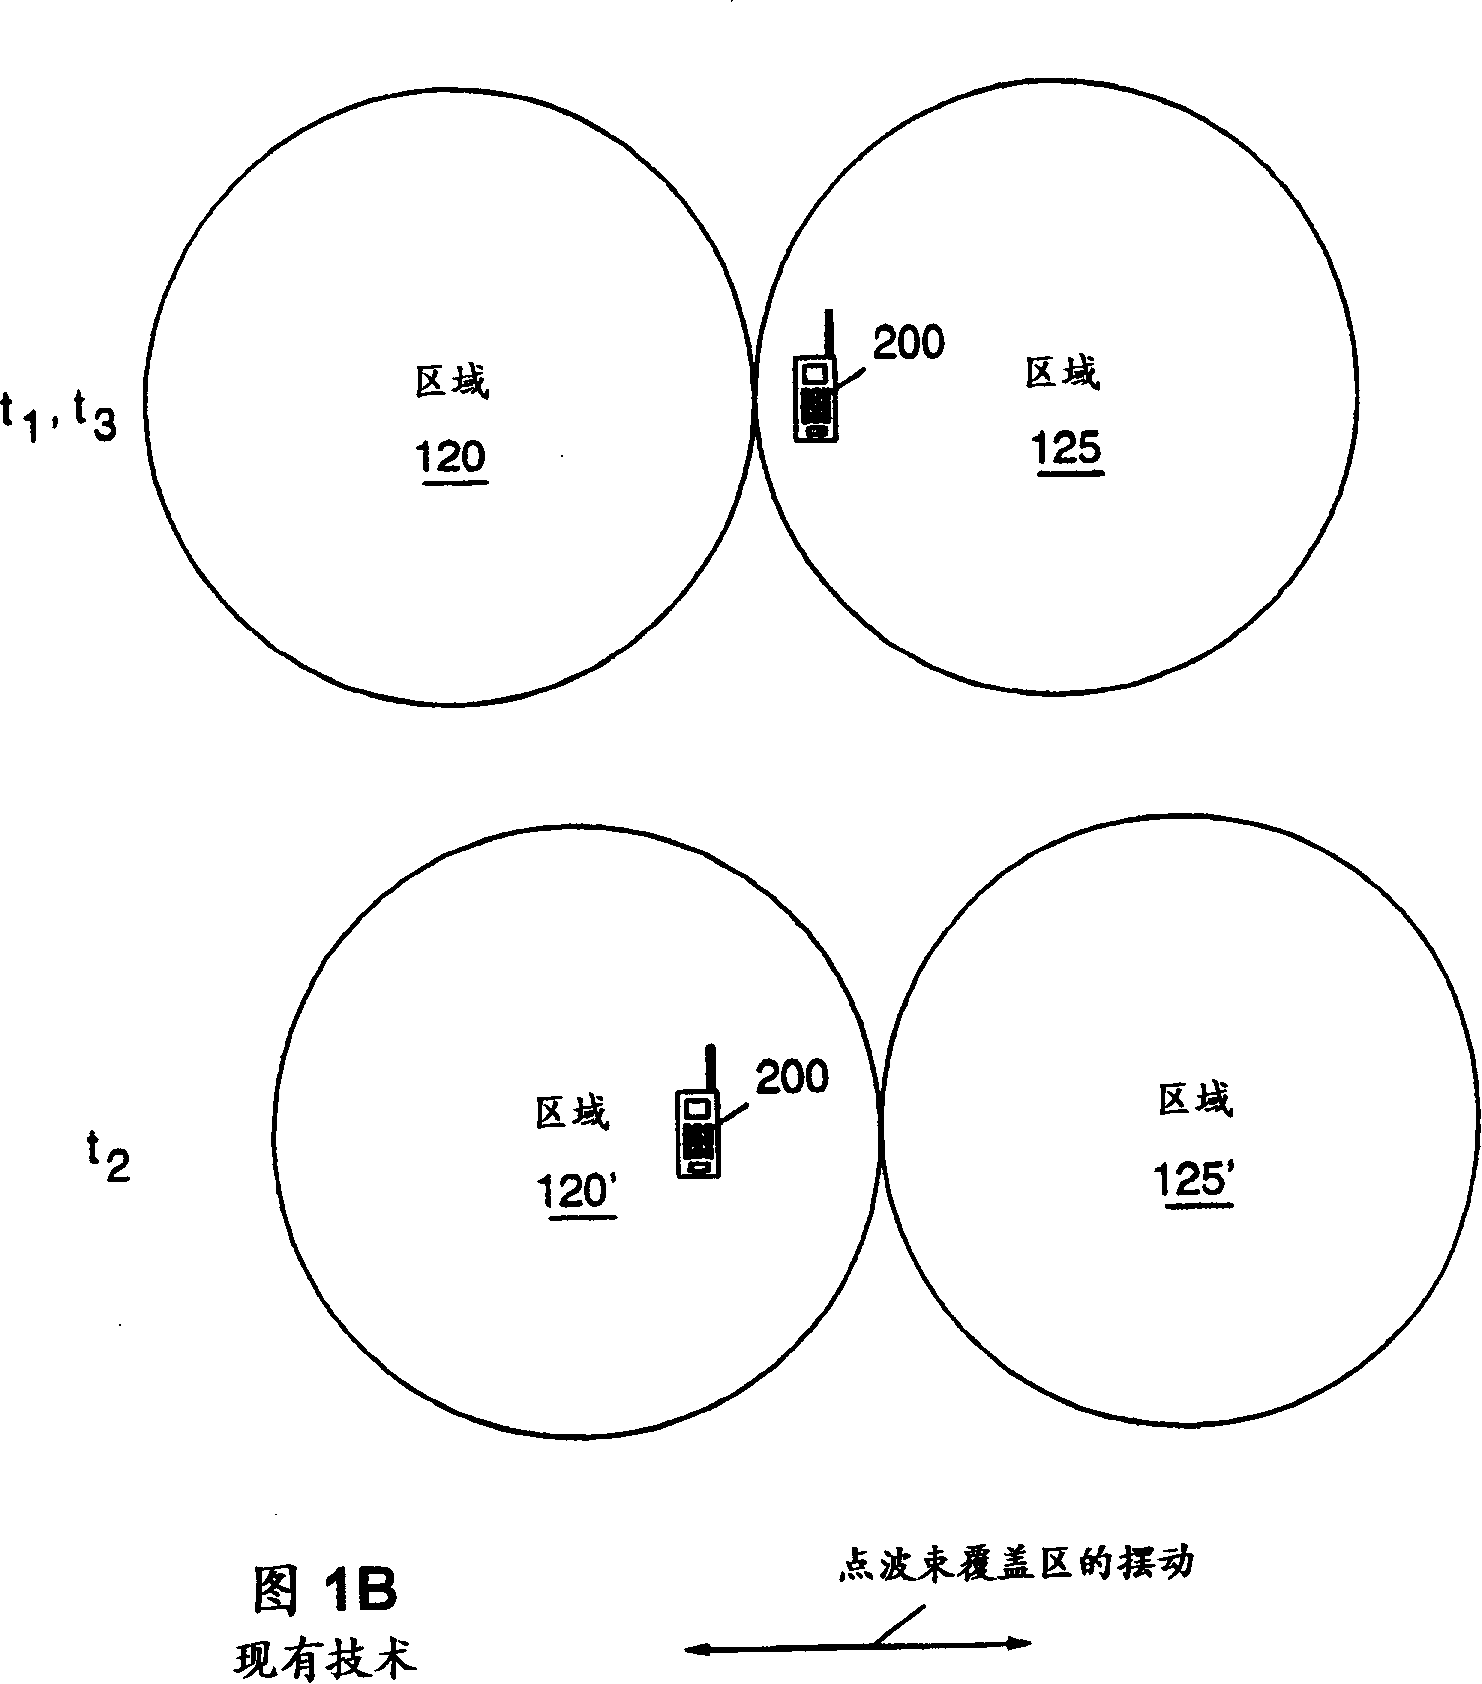 Method and device for reducing location update procedures in satellite communication systems